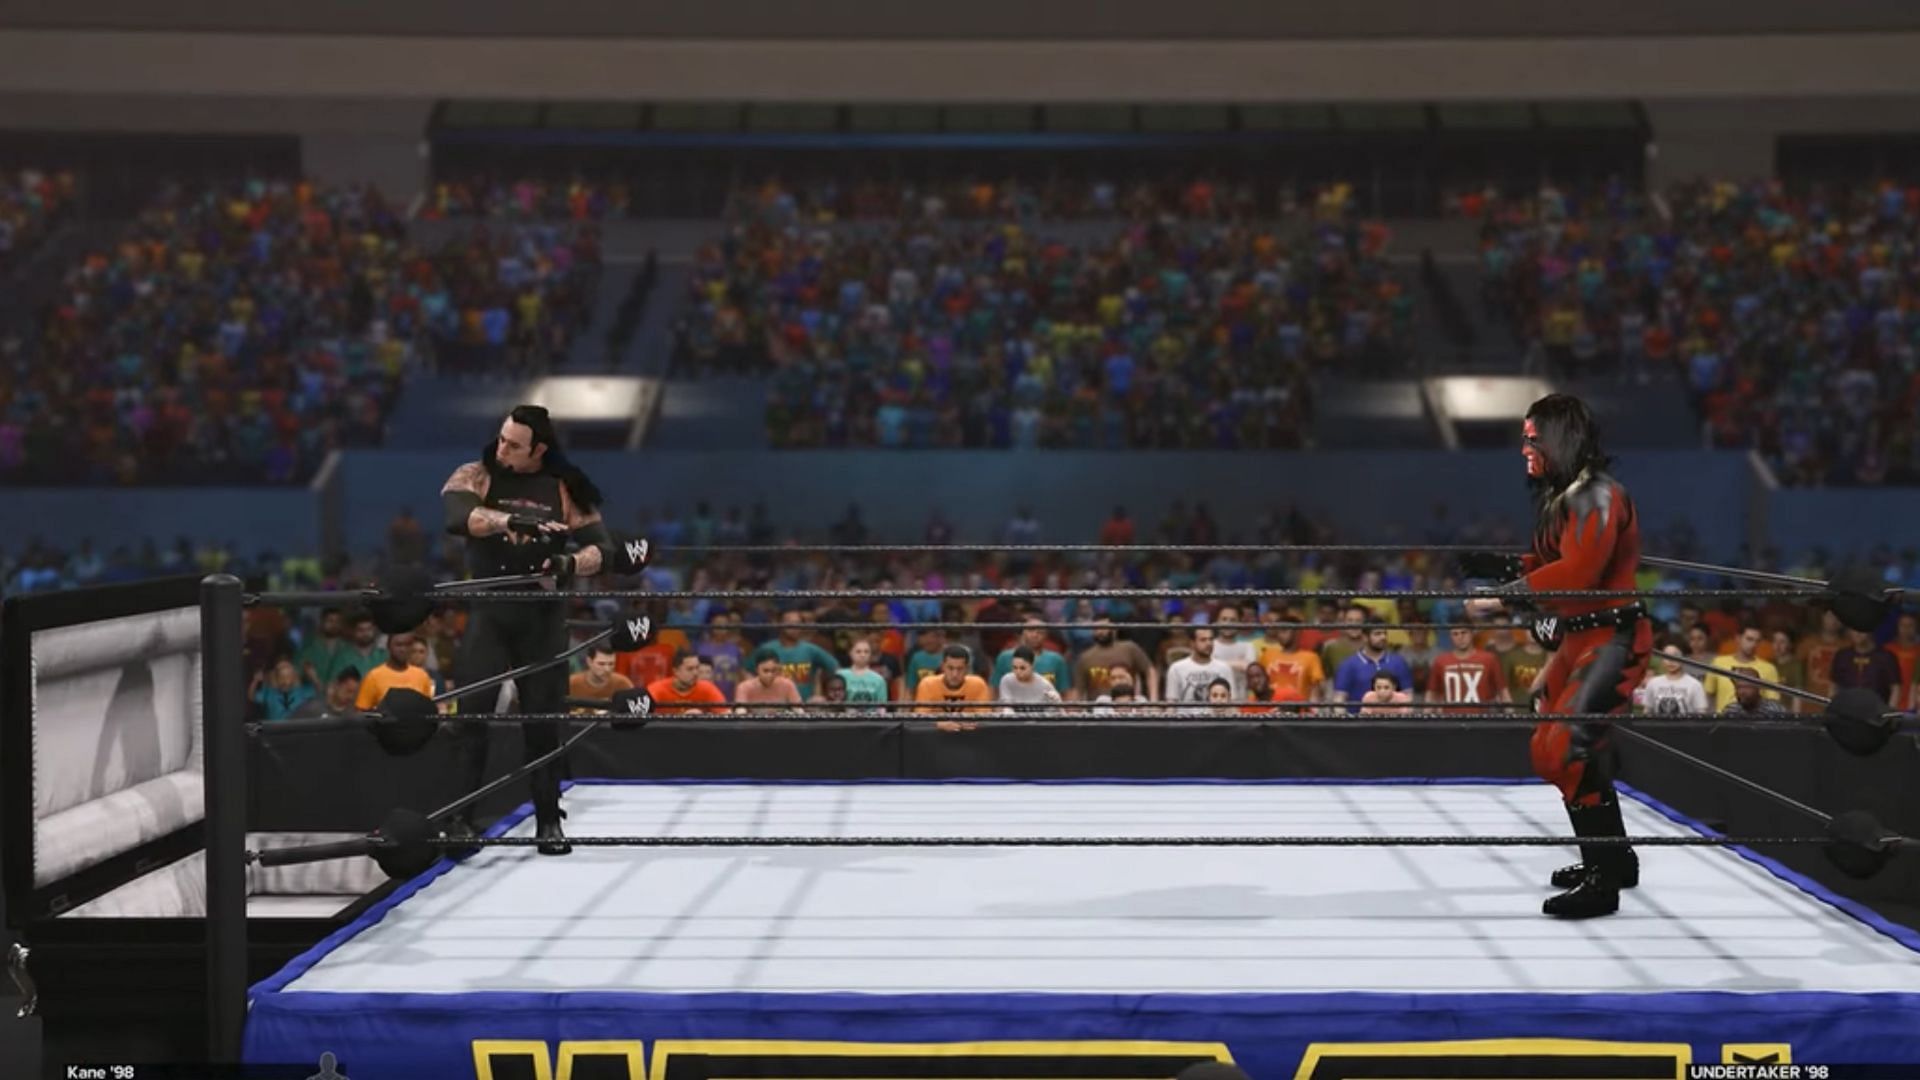 After executing the Finisher, open the Casket (Image via YouTube/AJ4Games)